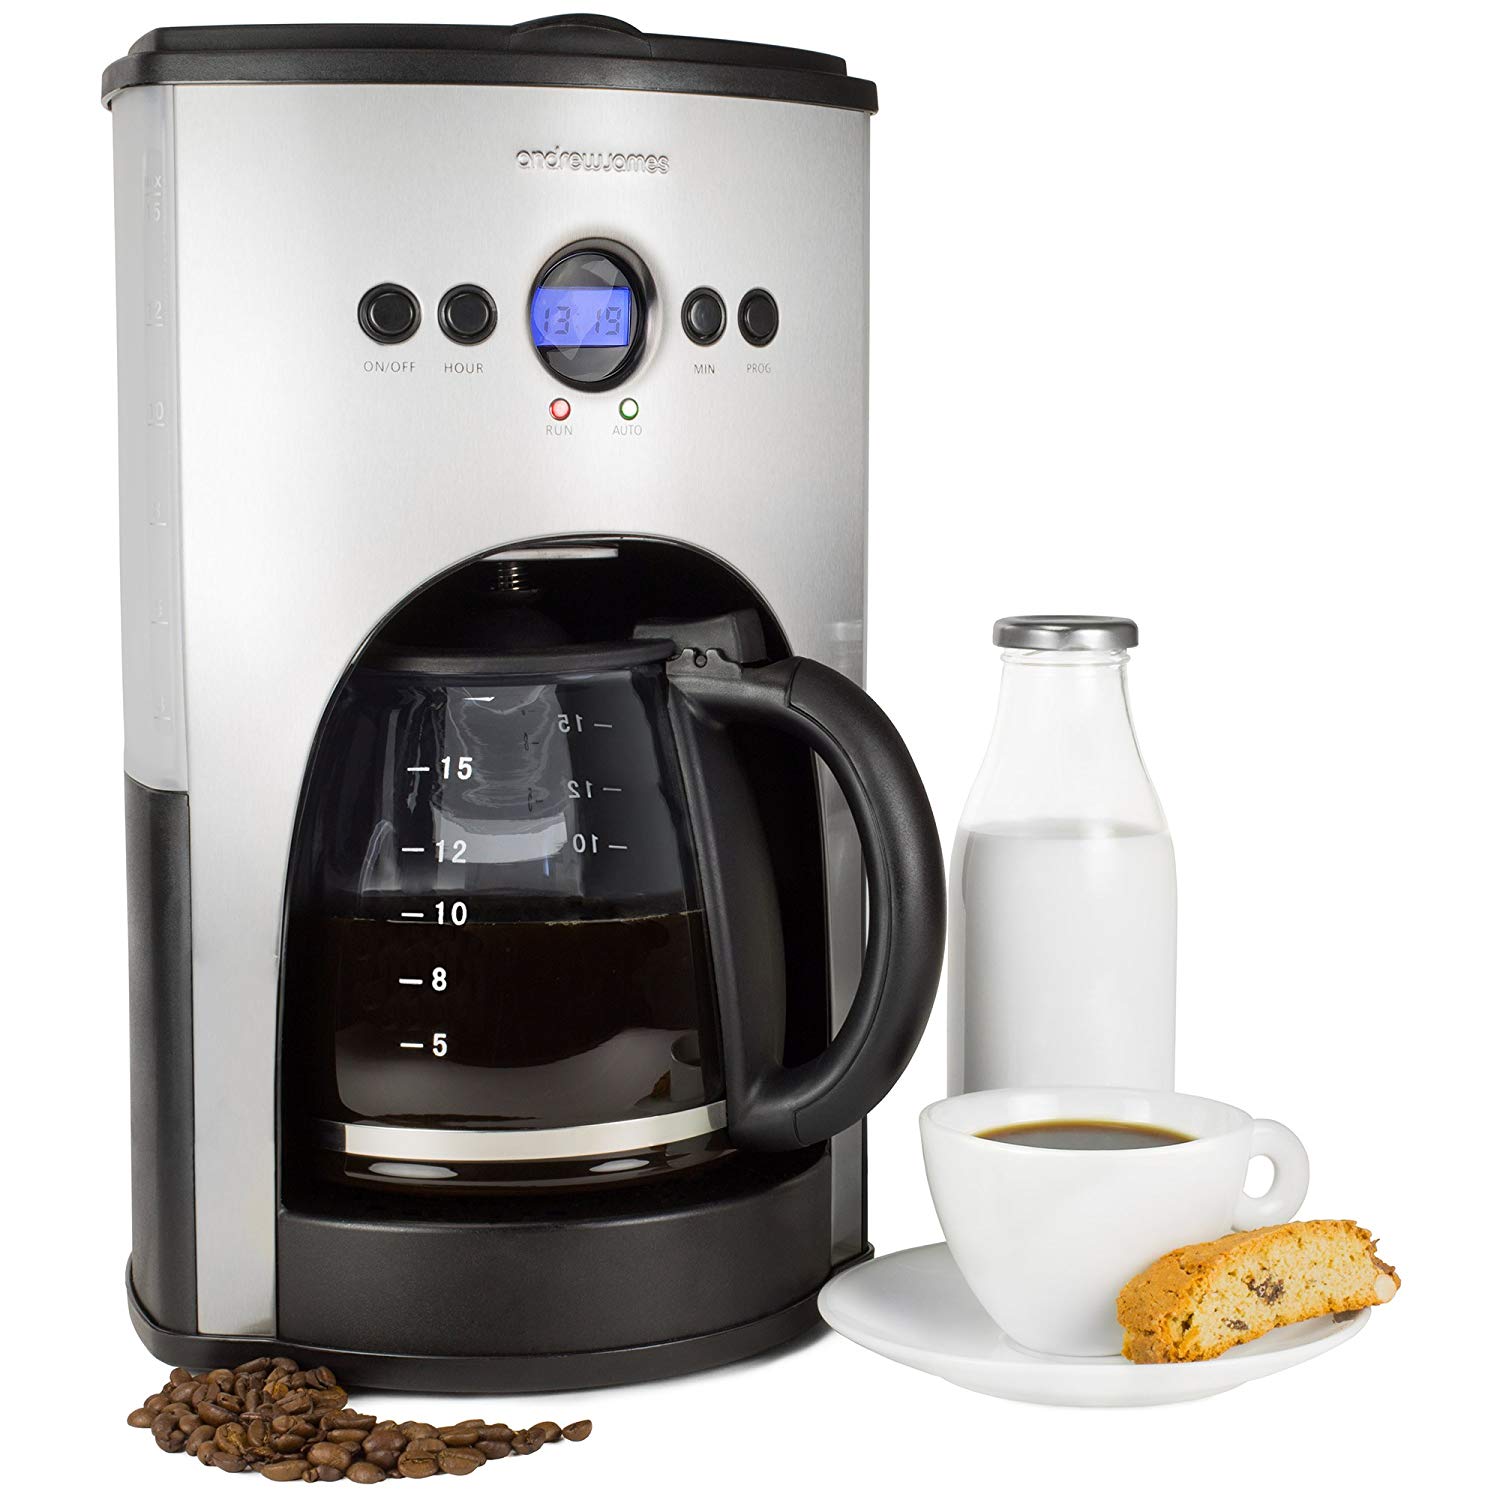 This Andrew James coffee maker is cheap and makes a very nice cup of coffee.